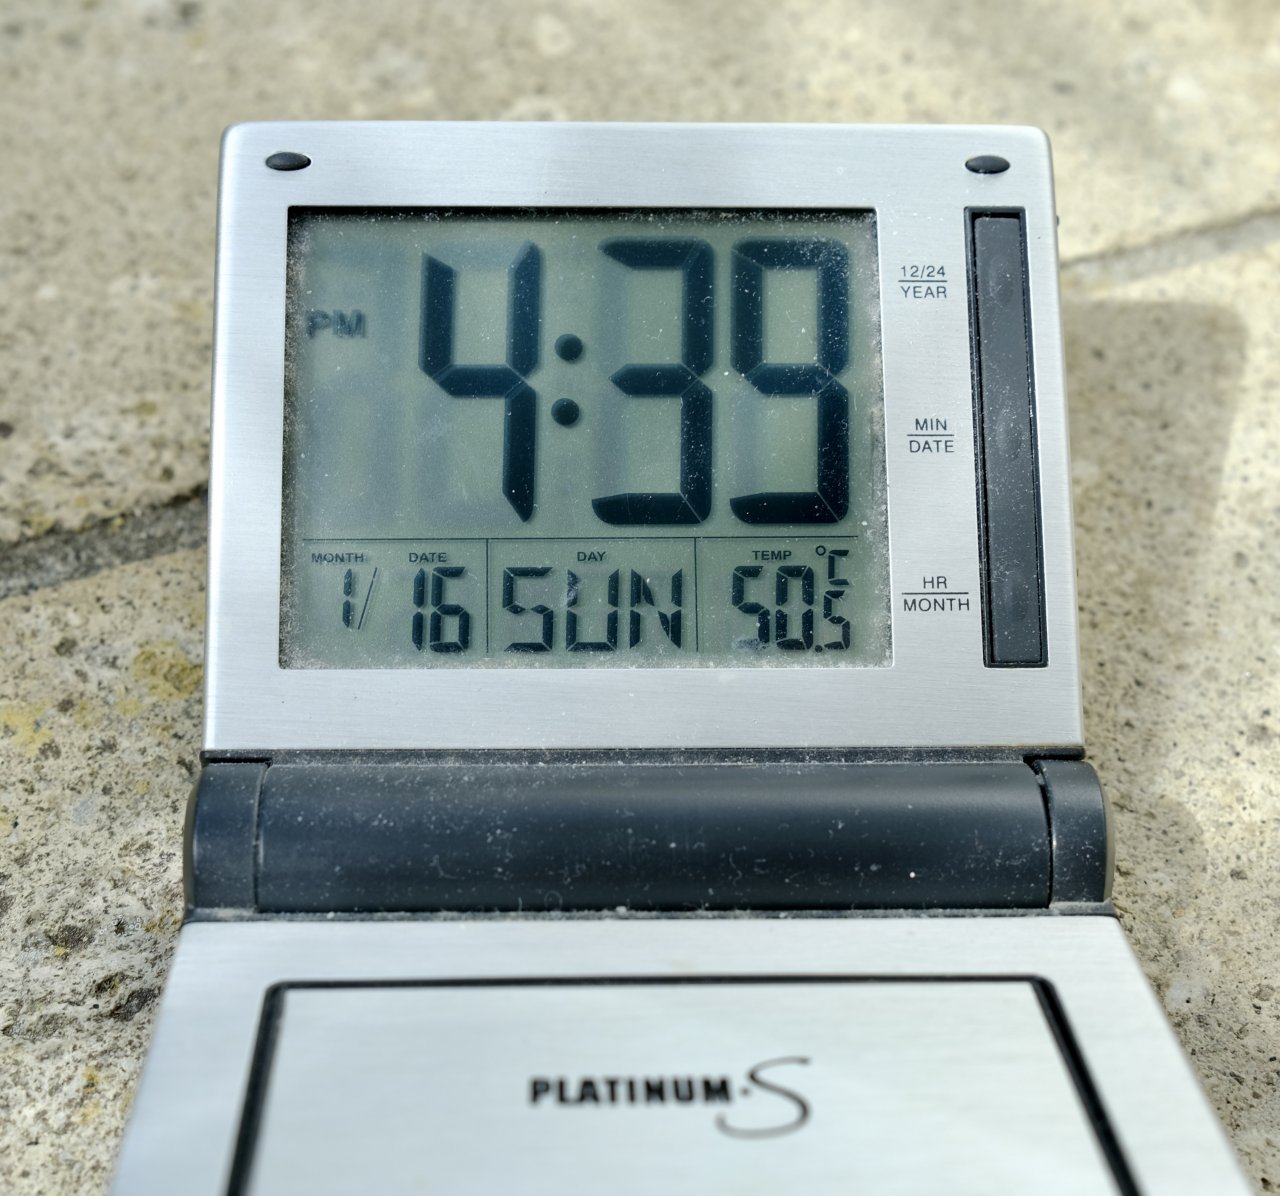 Temperature reading at 4:39pm from the stone tiles - 50.5°C or 122.9°F